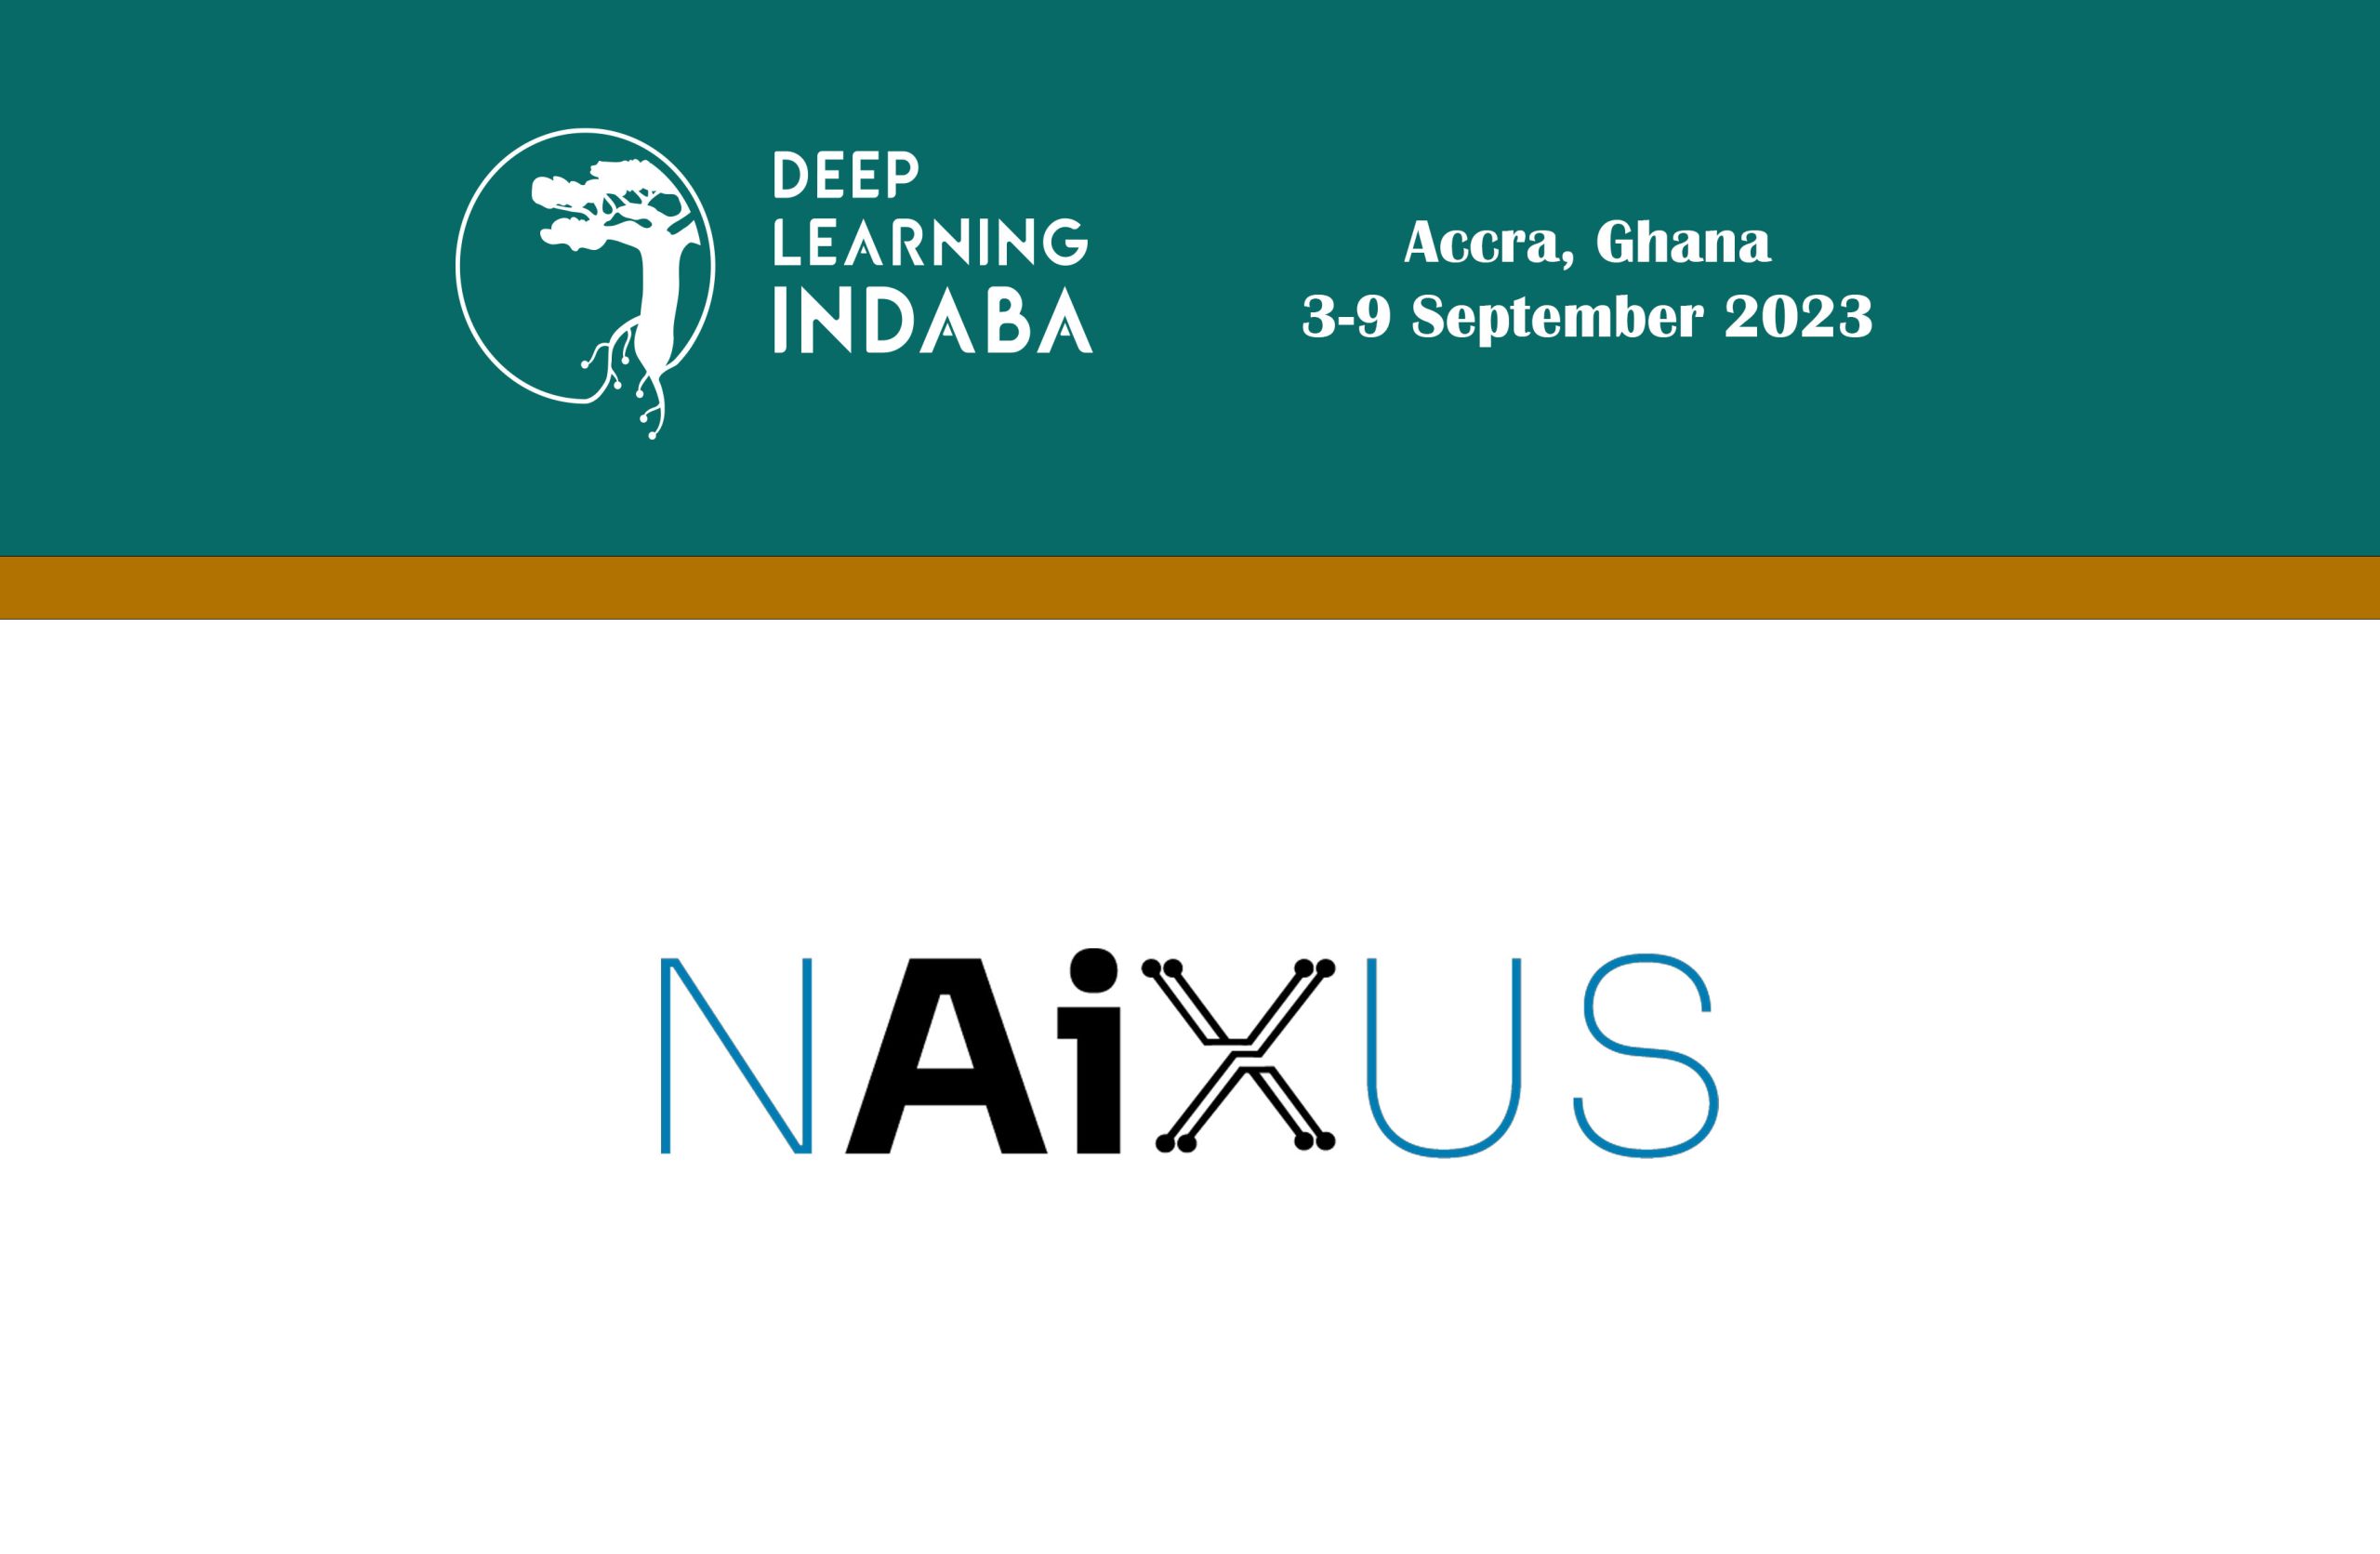 In Person Meeting of the African Members of the NAIXUS Network of AI Researchers on AI and Development